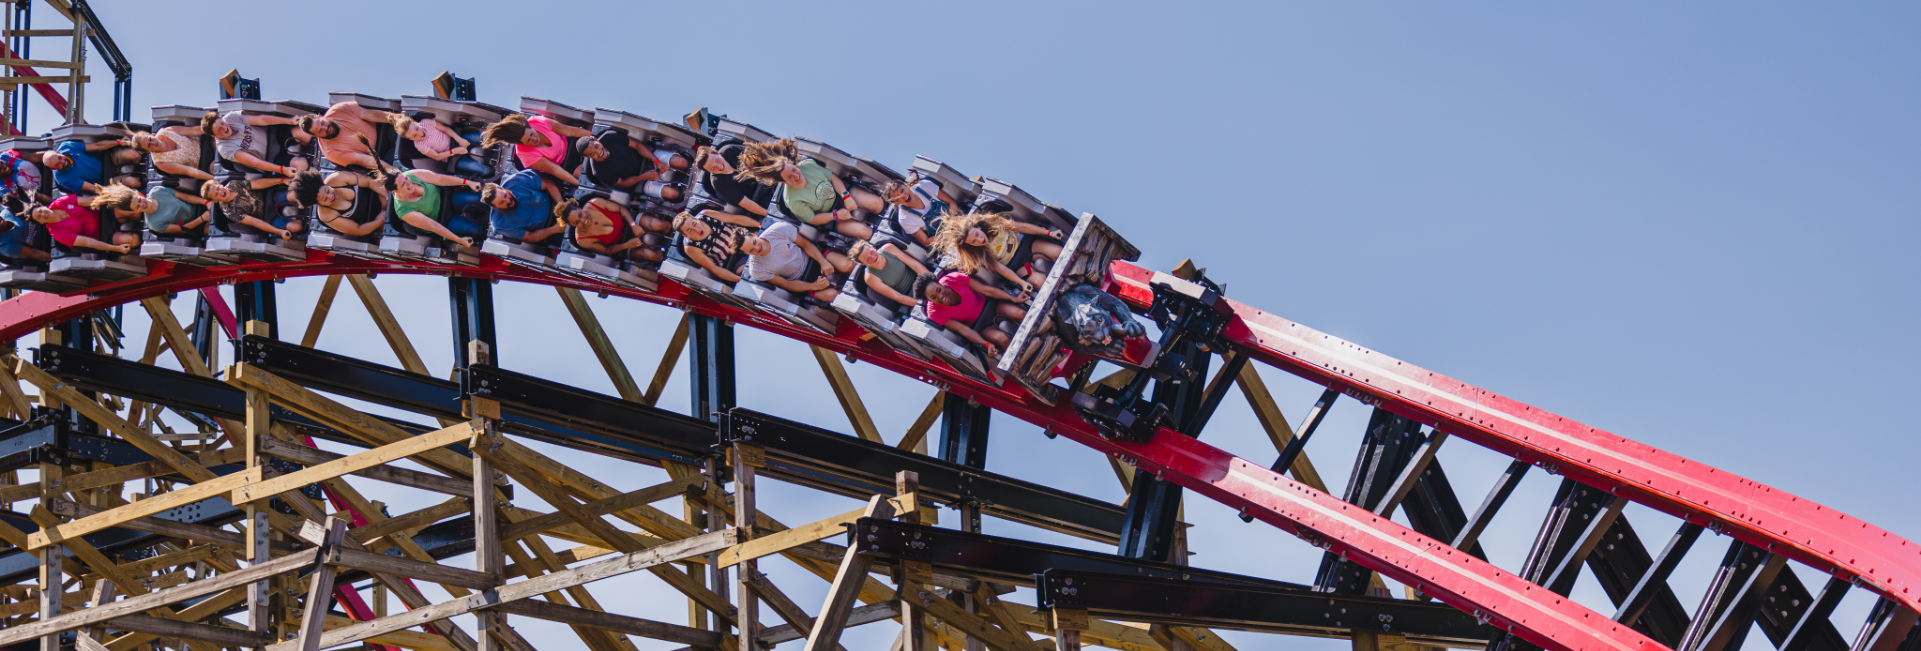 A picture of the wildcat revenge ride